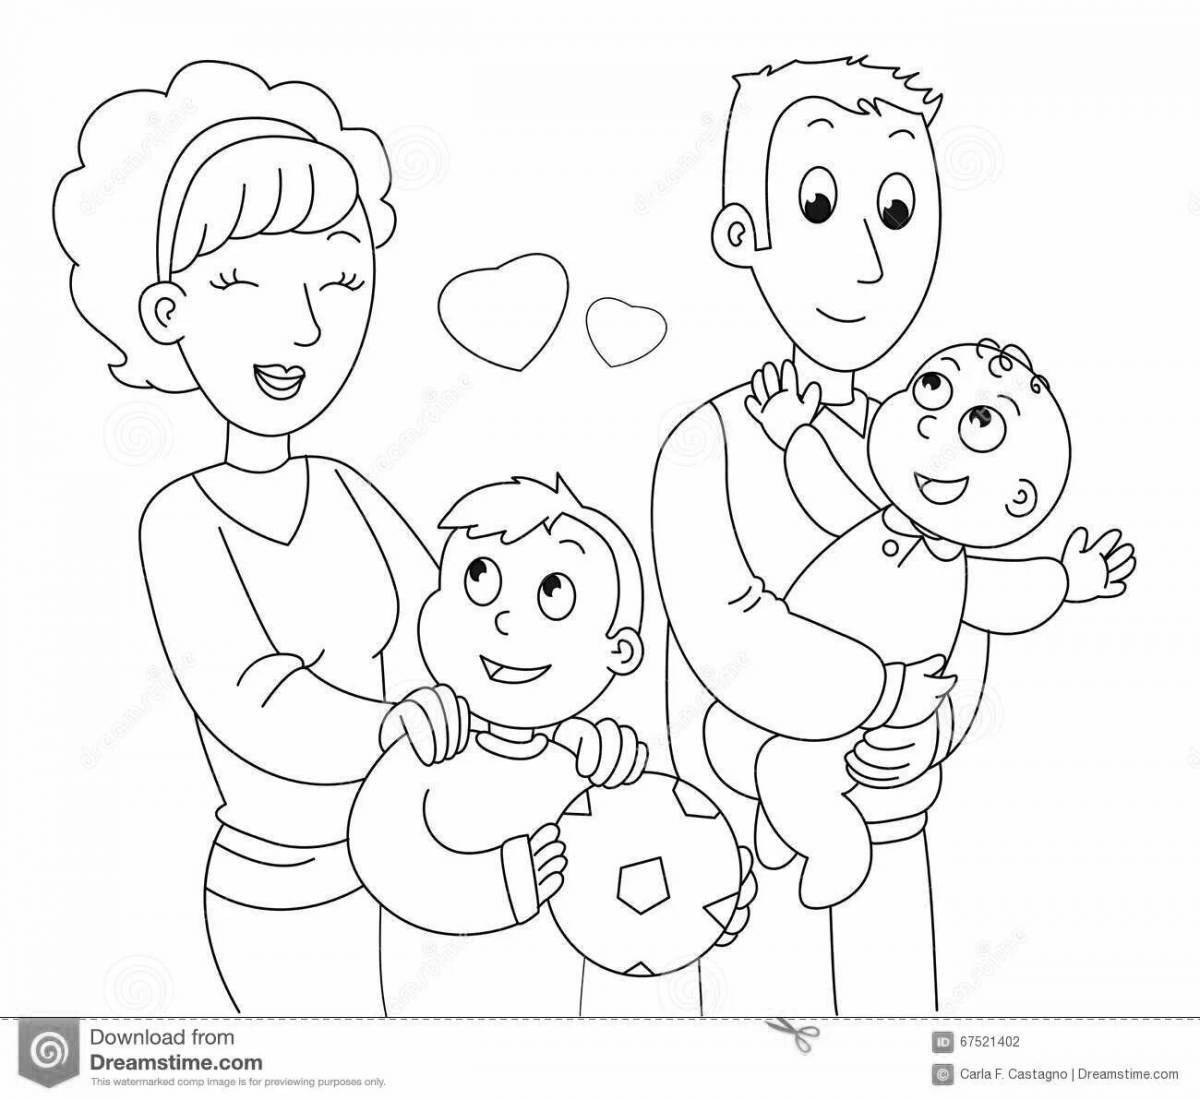 Charming son and dad coloring book